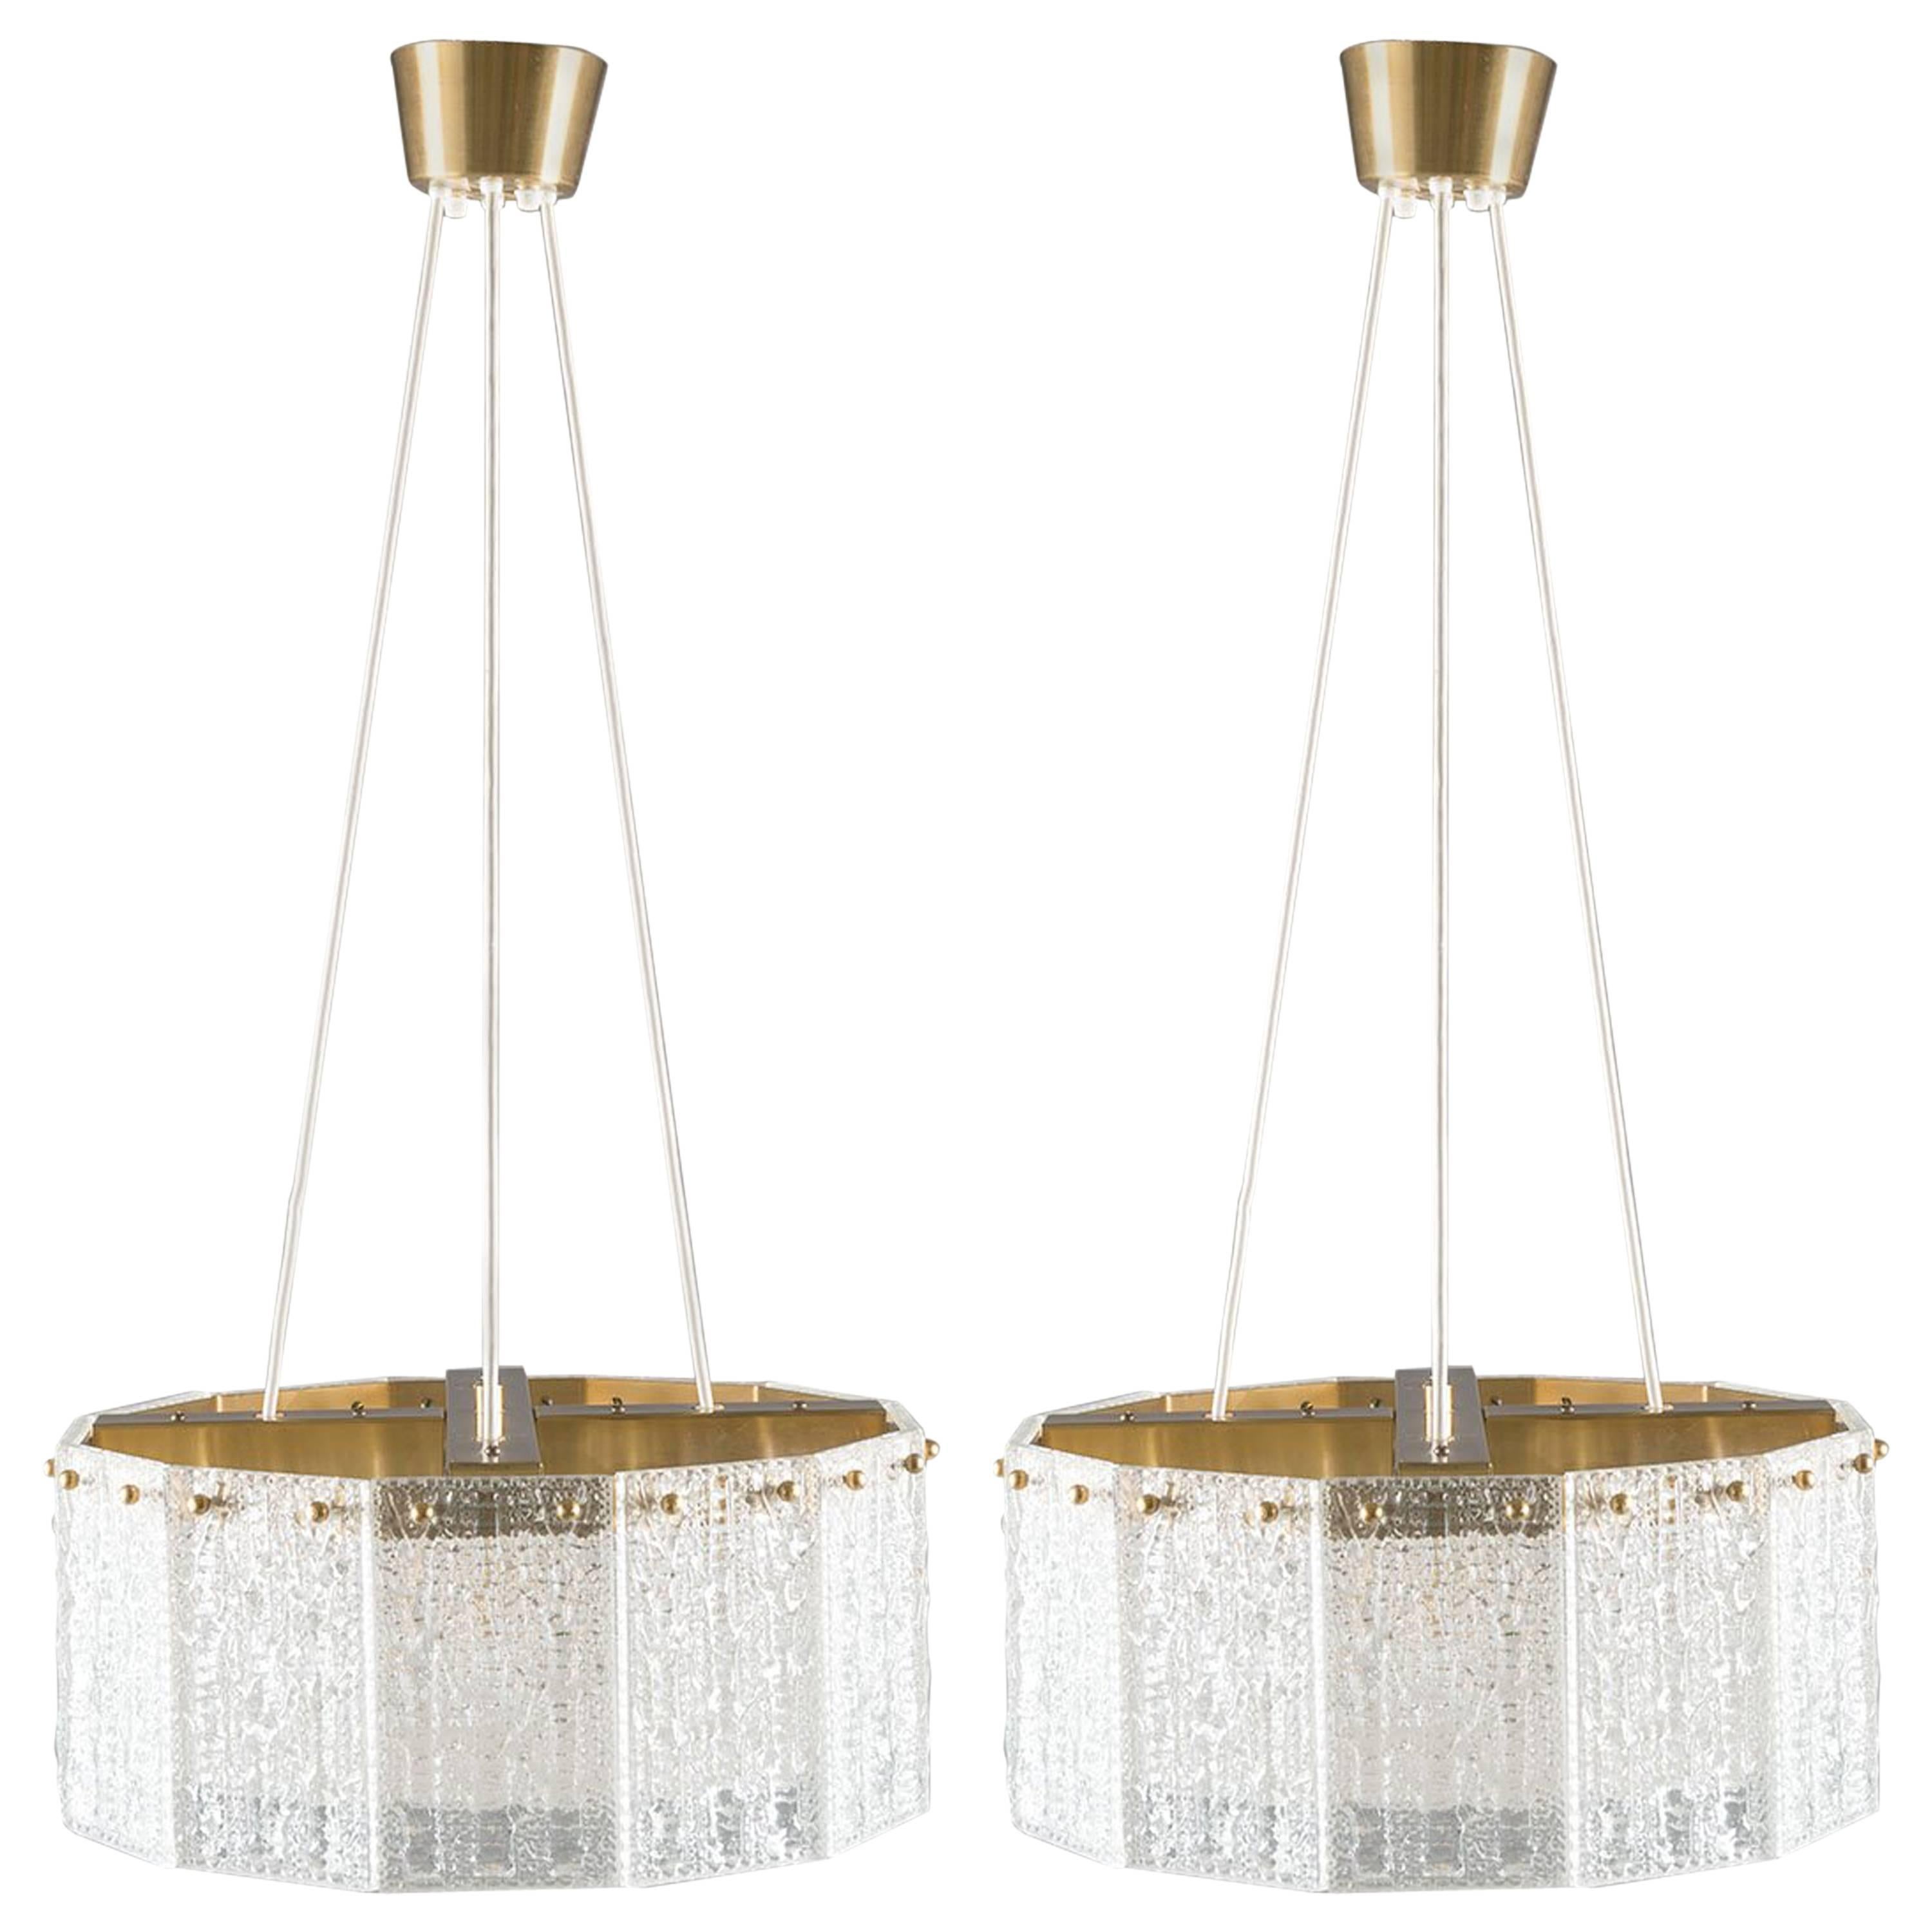 Pair of Swedish Mid-Century Pendants in Glass and Brass